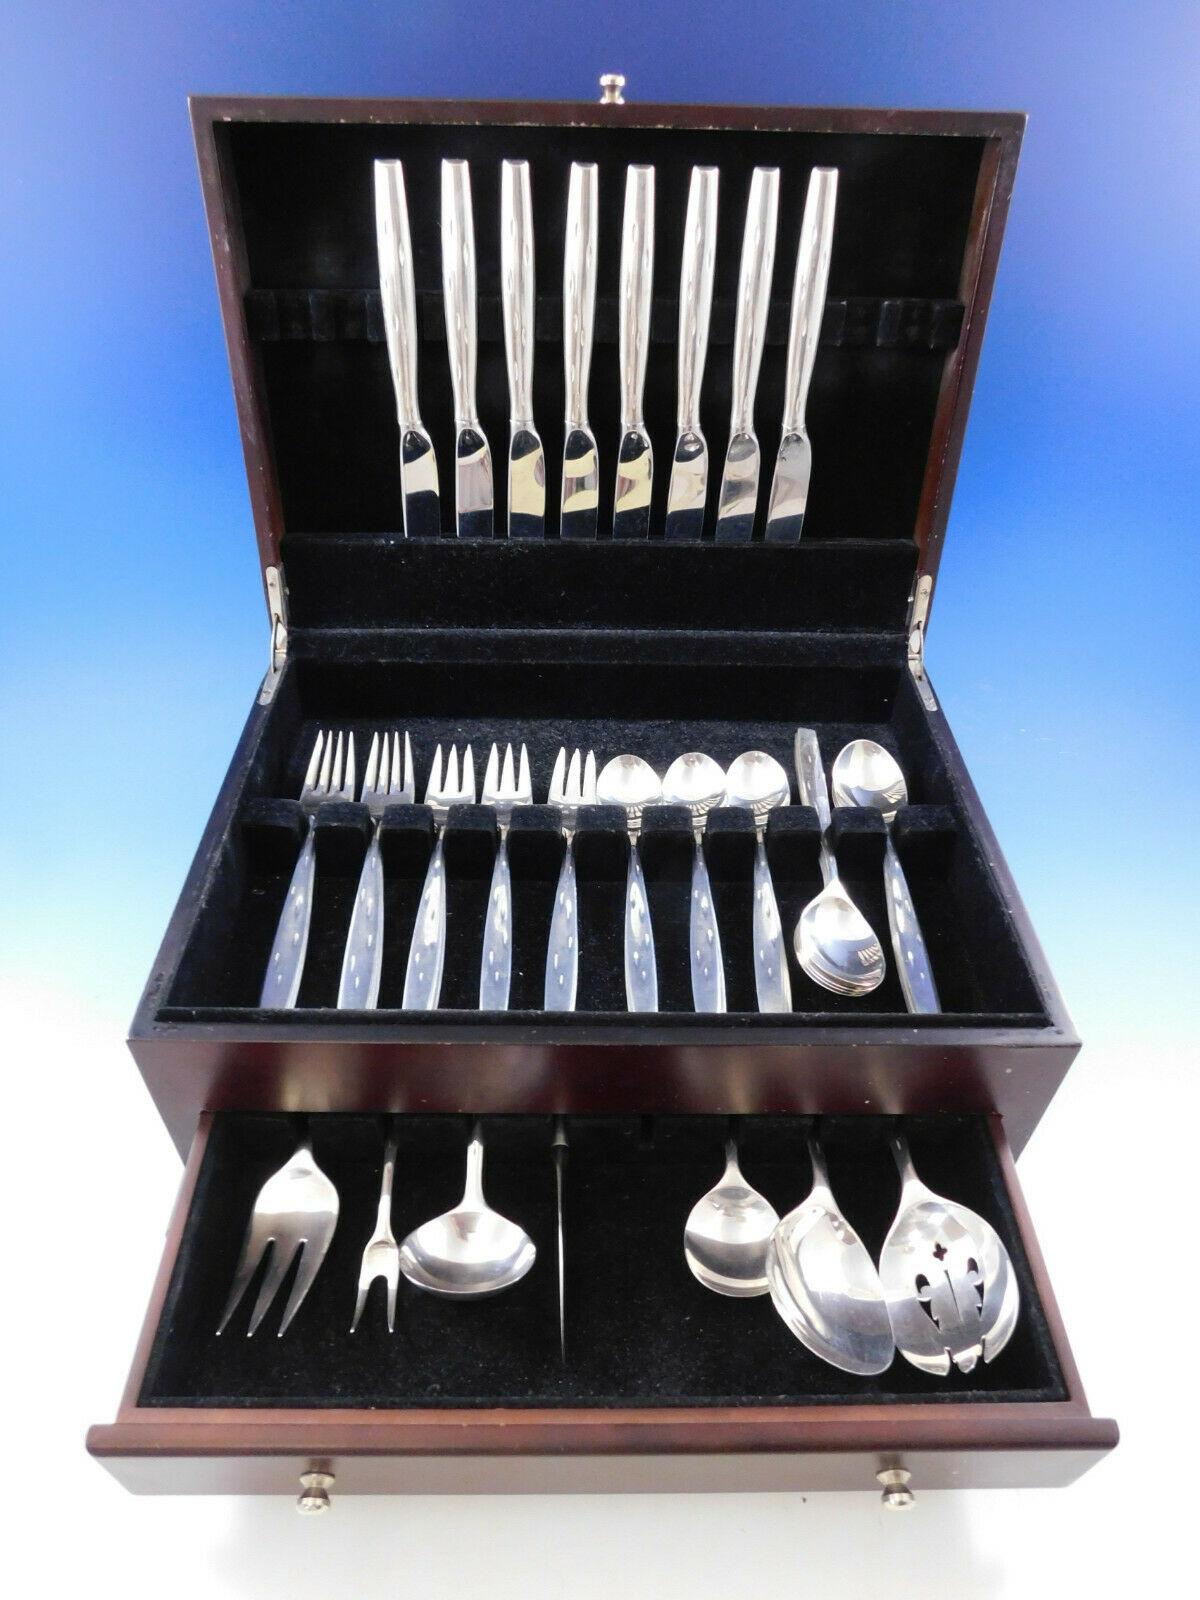 Discovery by Wallace sterling silver flatware set, 47 pieces. This set includes:

8 Dinner Knives, 9 1/2